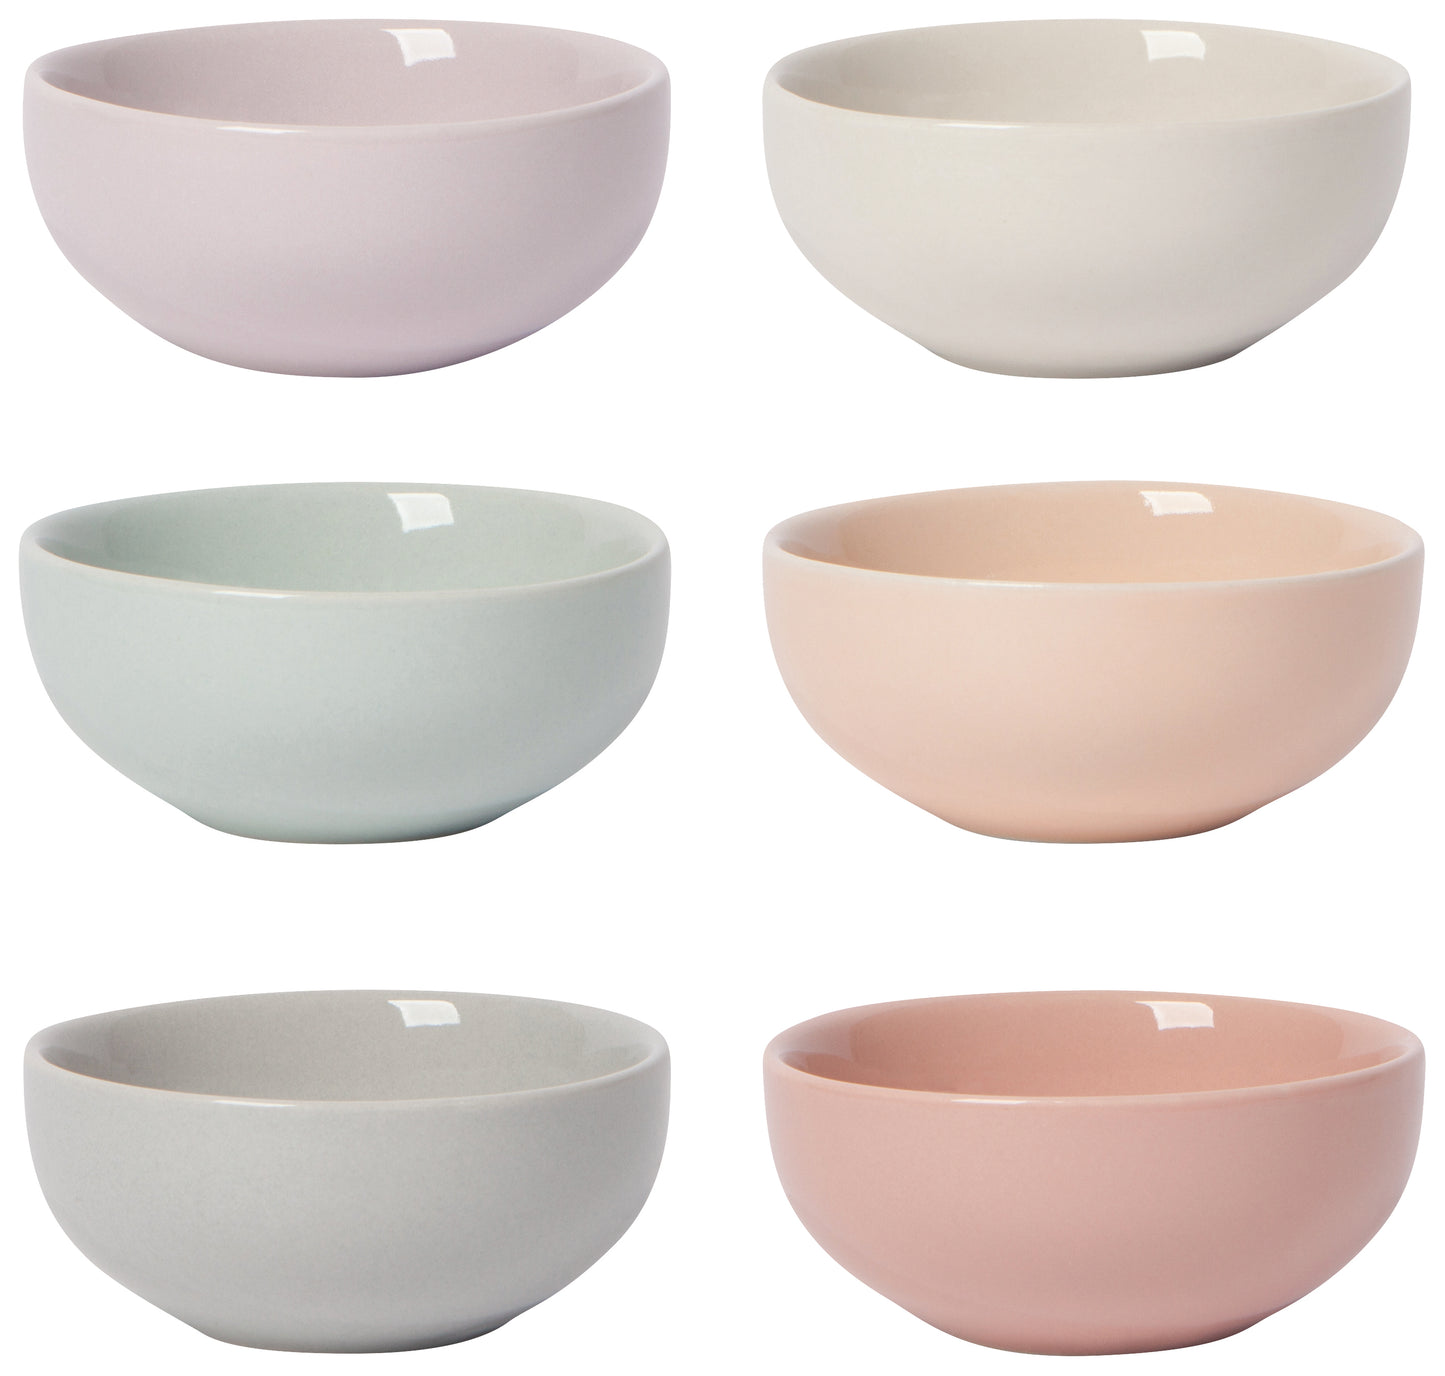 6 small bowls on a white background, colors are light pink, cream, light blue, peach, grey, and rose.